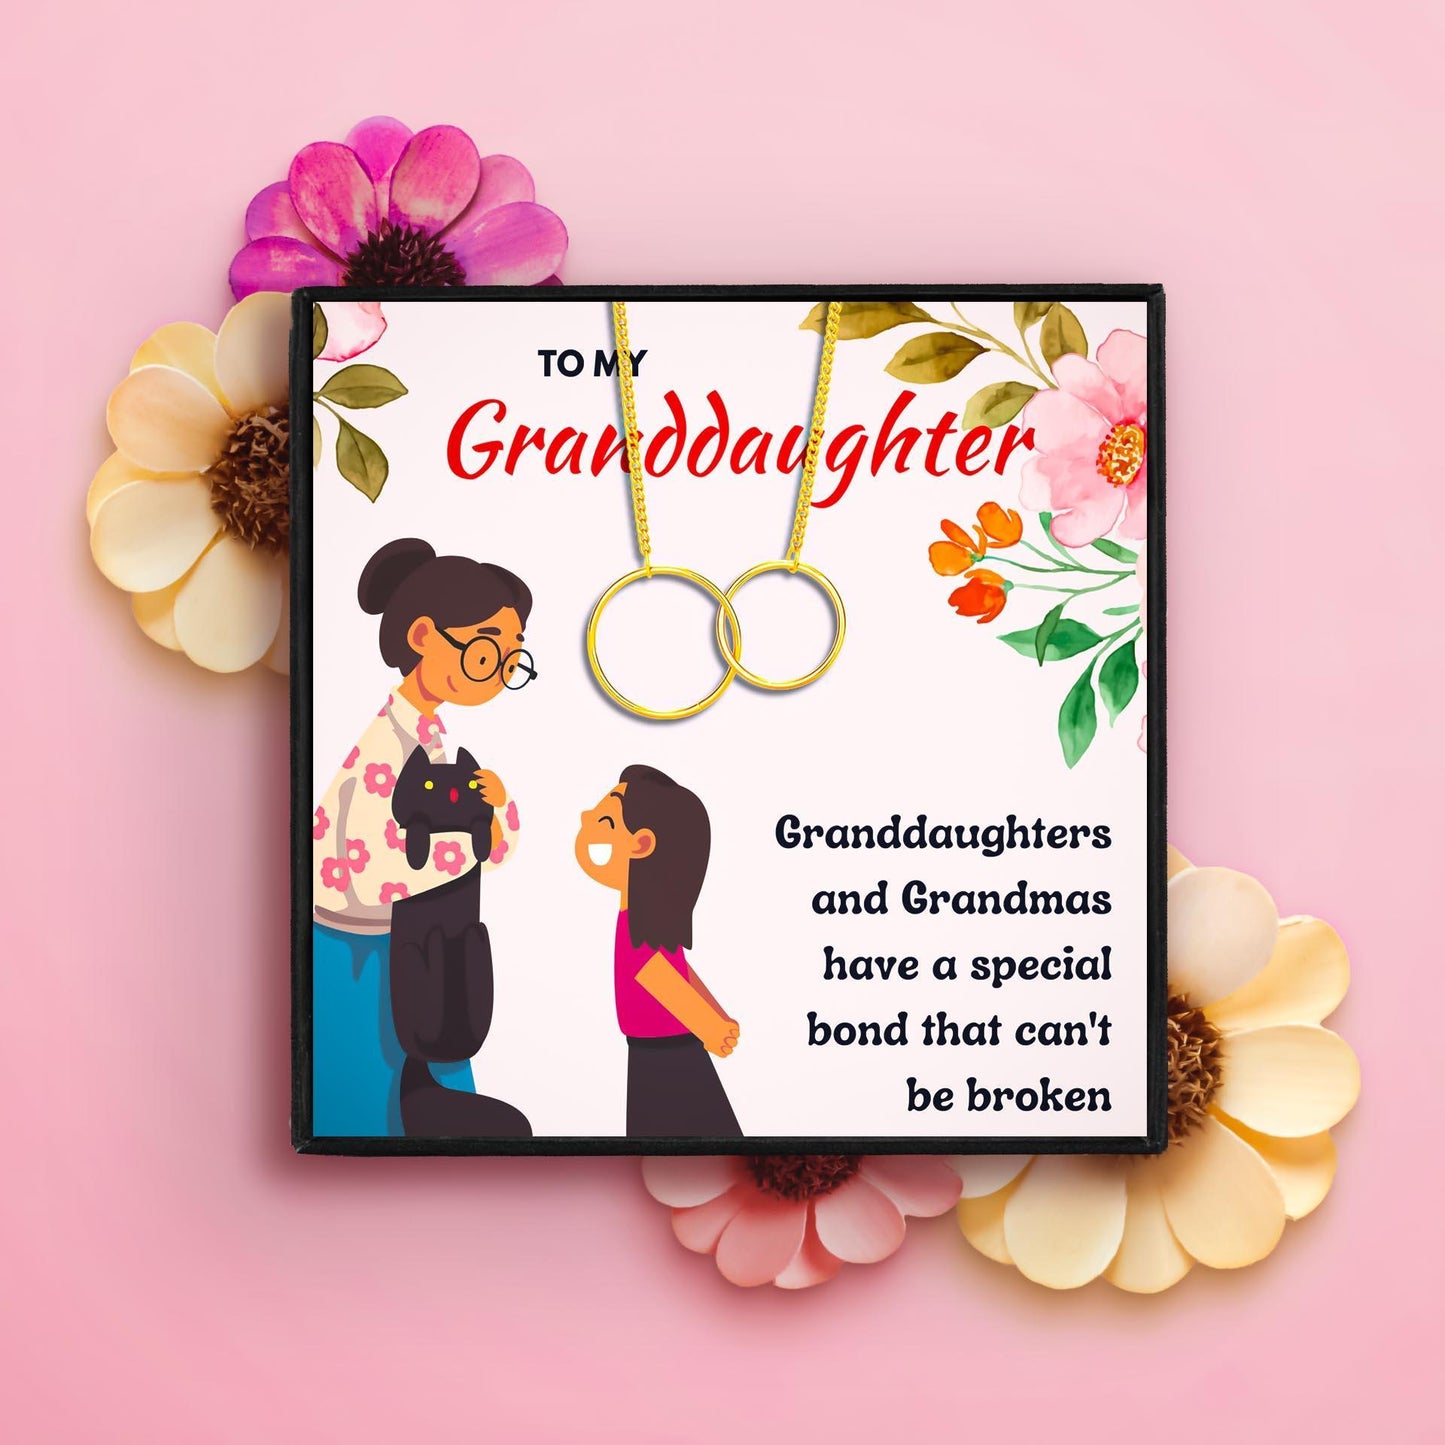 Thoughtful Gift Ideas For Your Granddaughter in 2023 | Thoughtful Gift Ideas For Your Granddaughter - undefined | granddaughter gifts from nana, Granddaughter Necklace, granddaughter necklace from grandma, grandma granddaughter necklace, grandmother granddaughter gifts | From Hunny Life | hunnylife.com